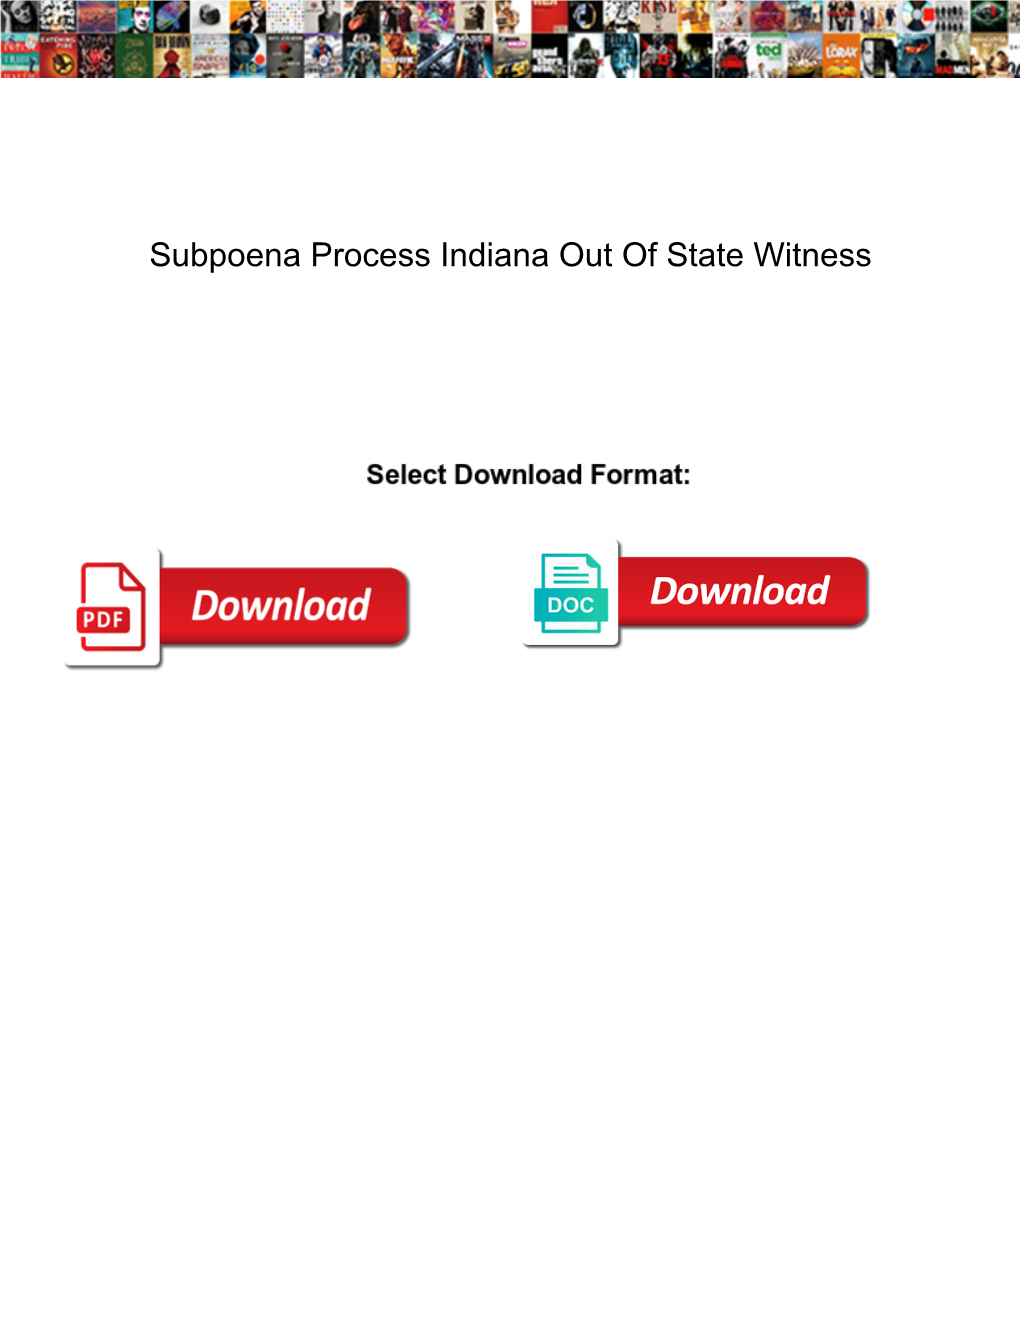 Subpoena Process Indiana out of State Witness